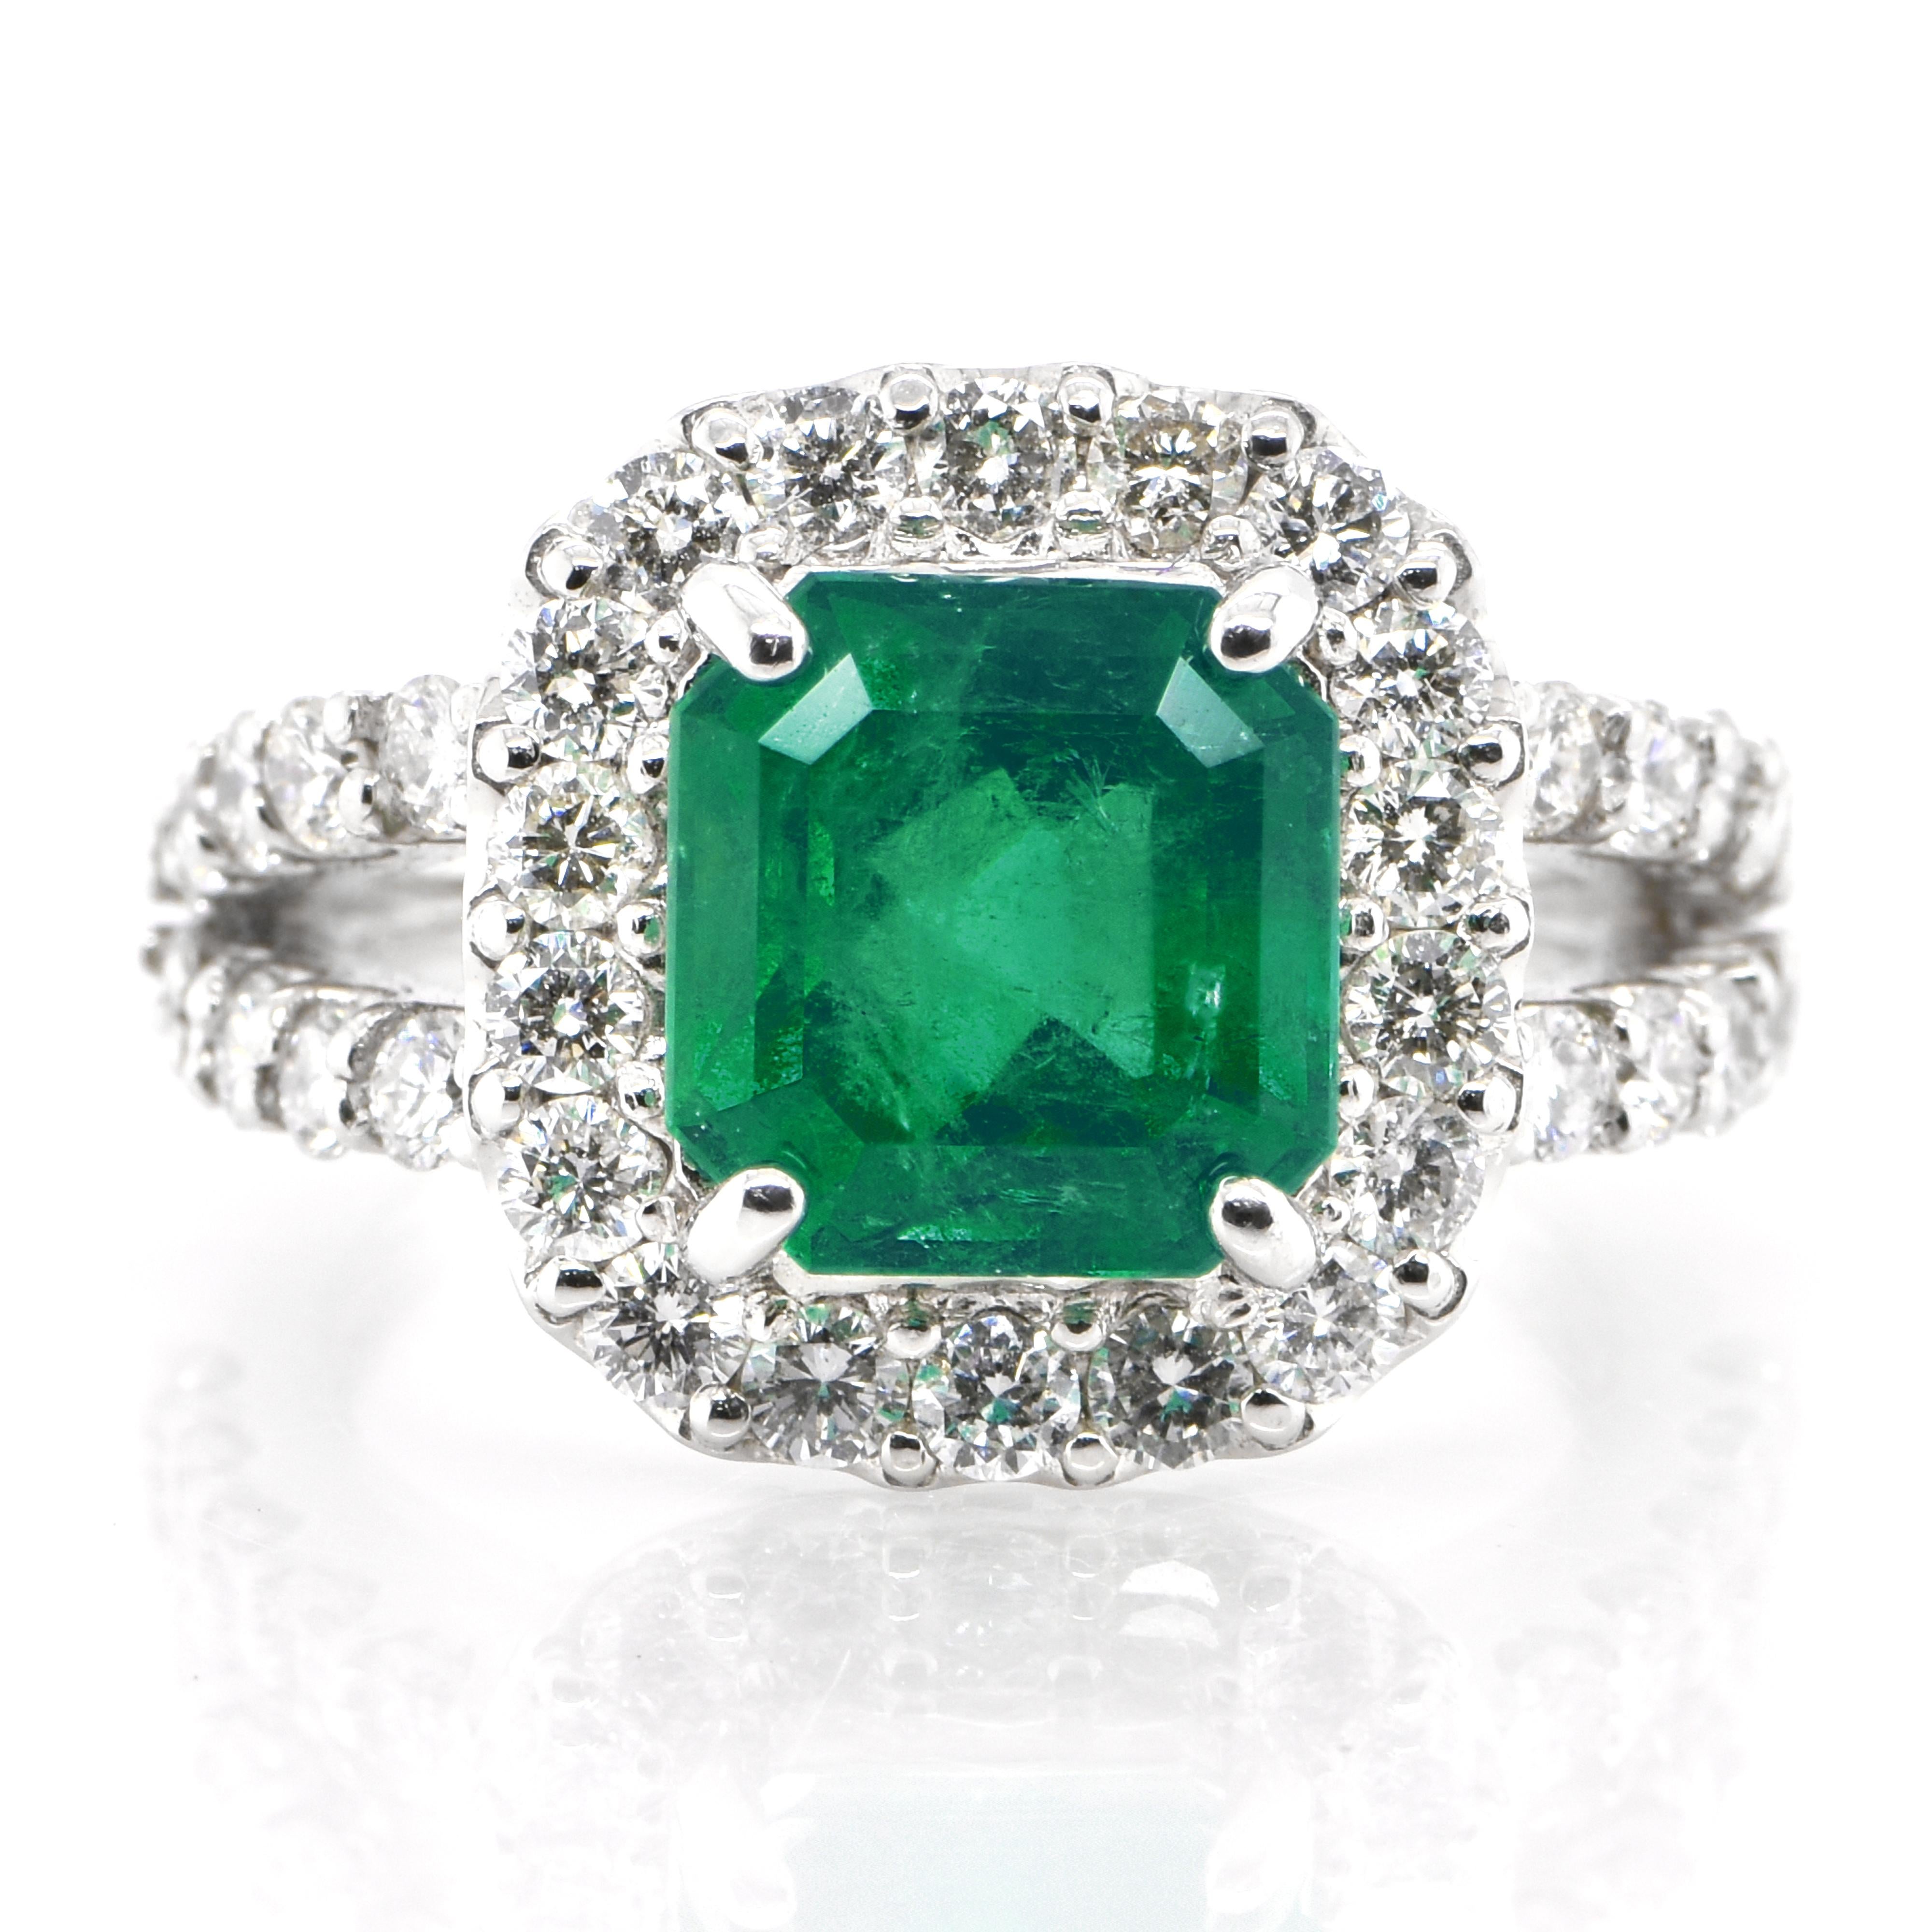 A stunning cocktail halo ring featuring a 2.90 Carat Natural Emerald and 1.14 Carats of Diamond Accents set in Platinum. People have admired emerald’s green for thousands of years. Emeralds have always been associated with the lushest landscapes and